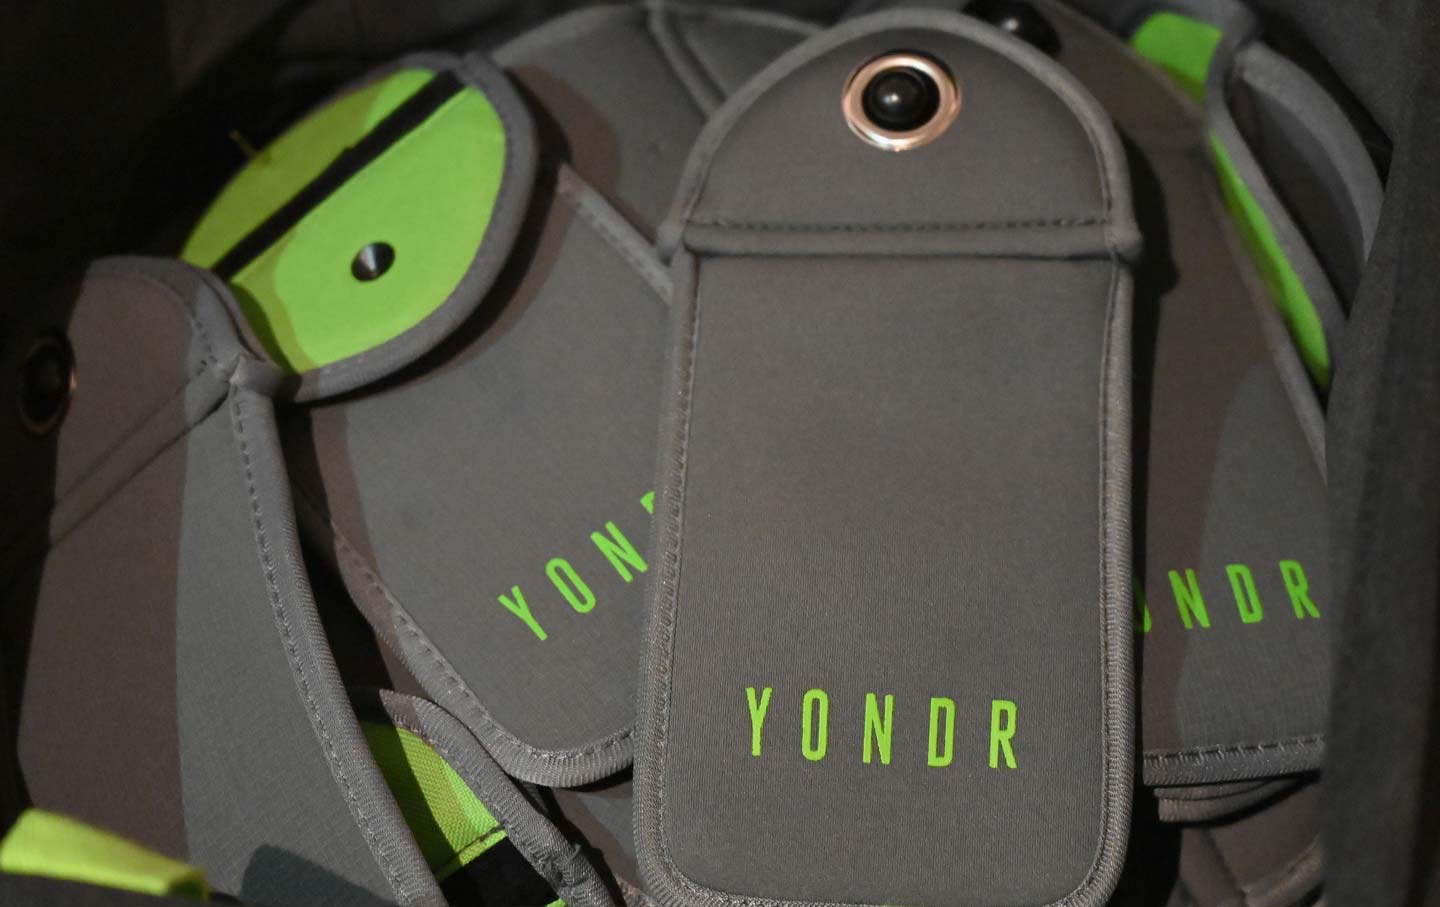 Yondr Pouches: A Revolution or a Mistake?